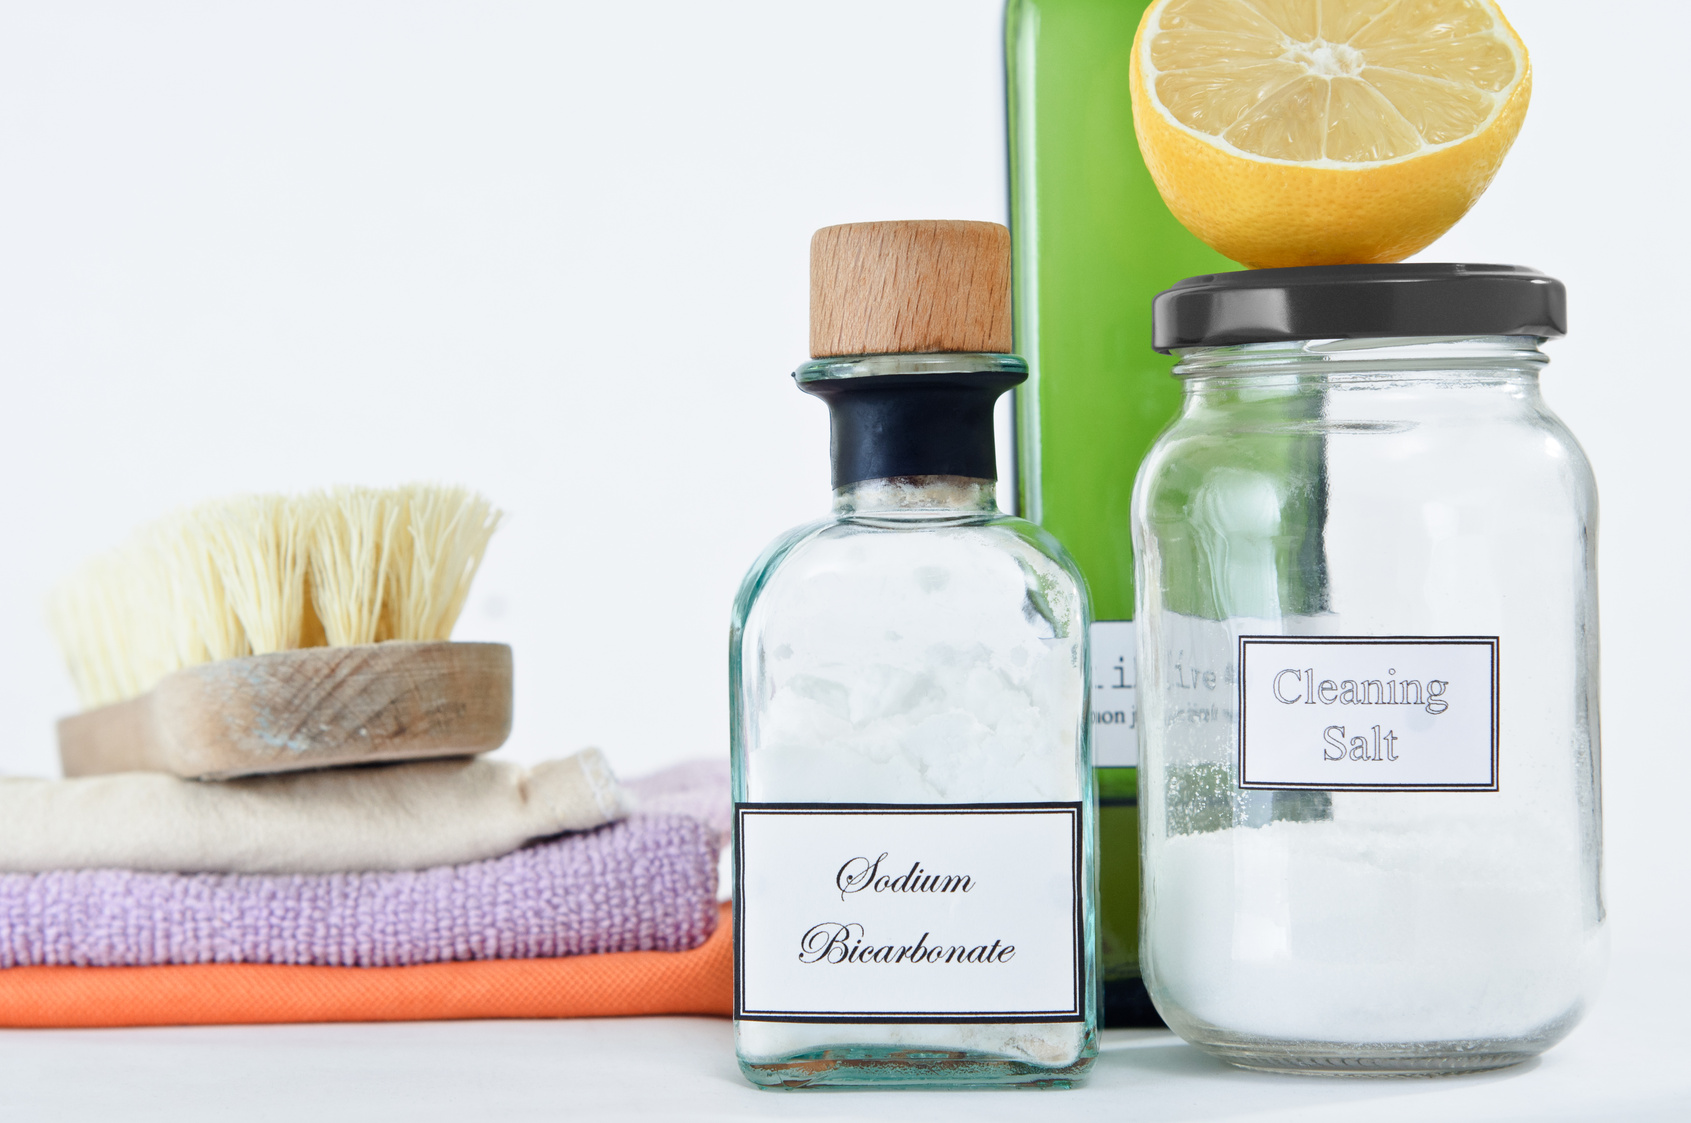 Natural cleaning. Home Cleaning products. 6 Натуральных средств для очистки дома. Clean product. Cleaning nature.